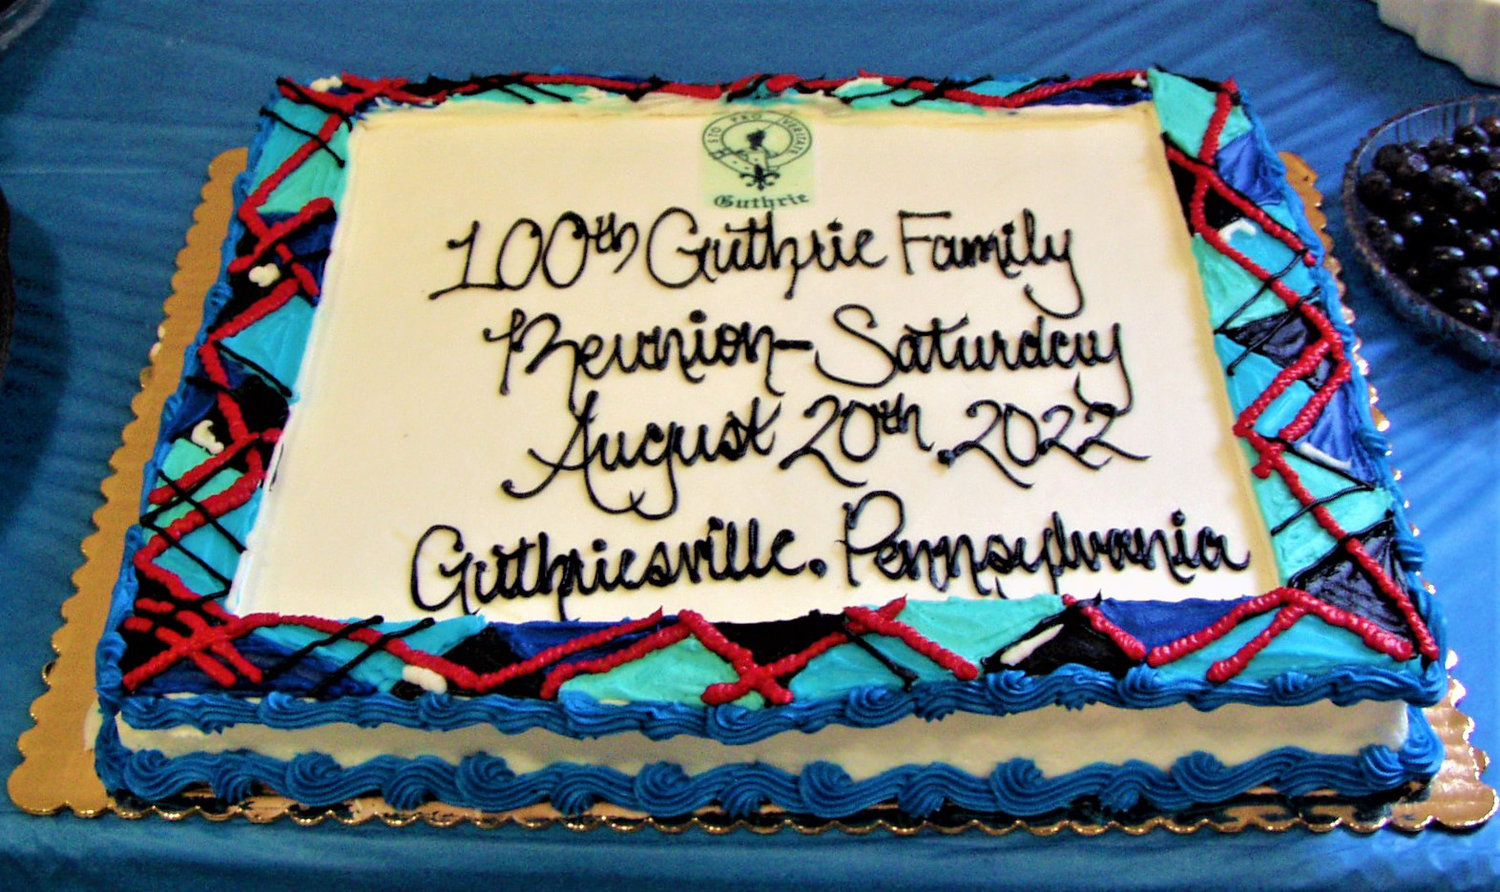 The 100th Guthrie family reunion featured a smorgasbord of dishes, including this sheet cake decorated to honor the occasion.